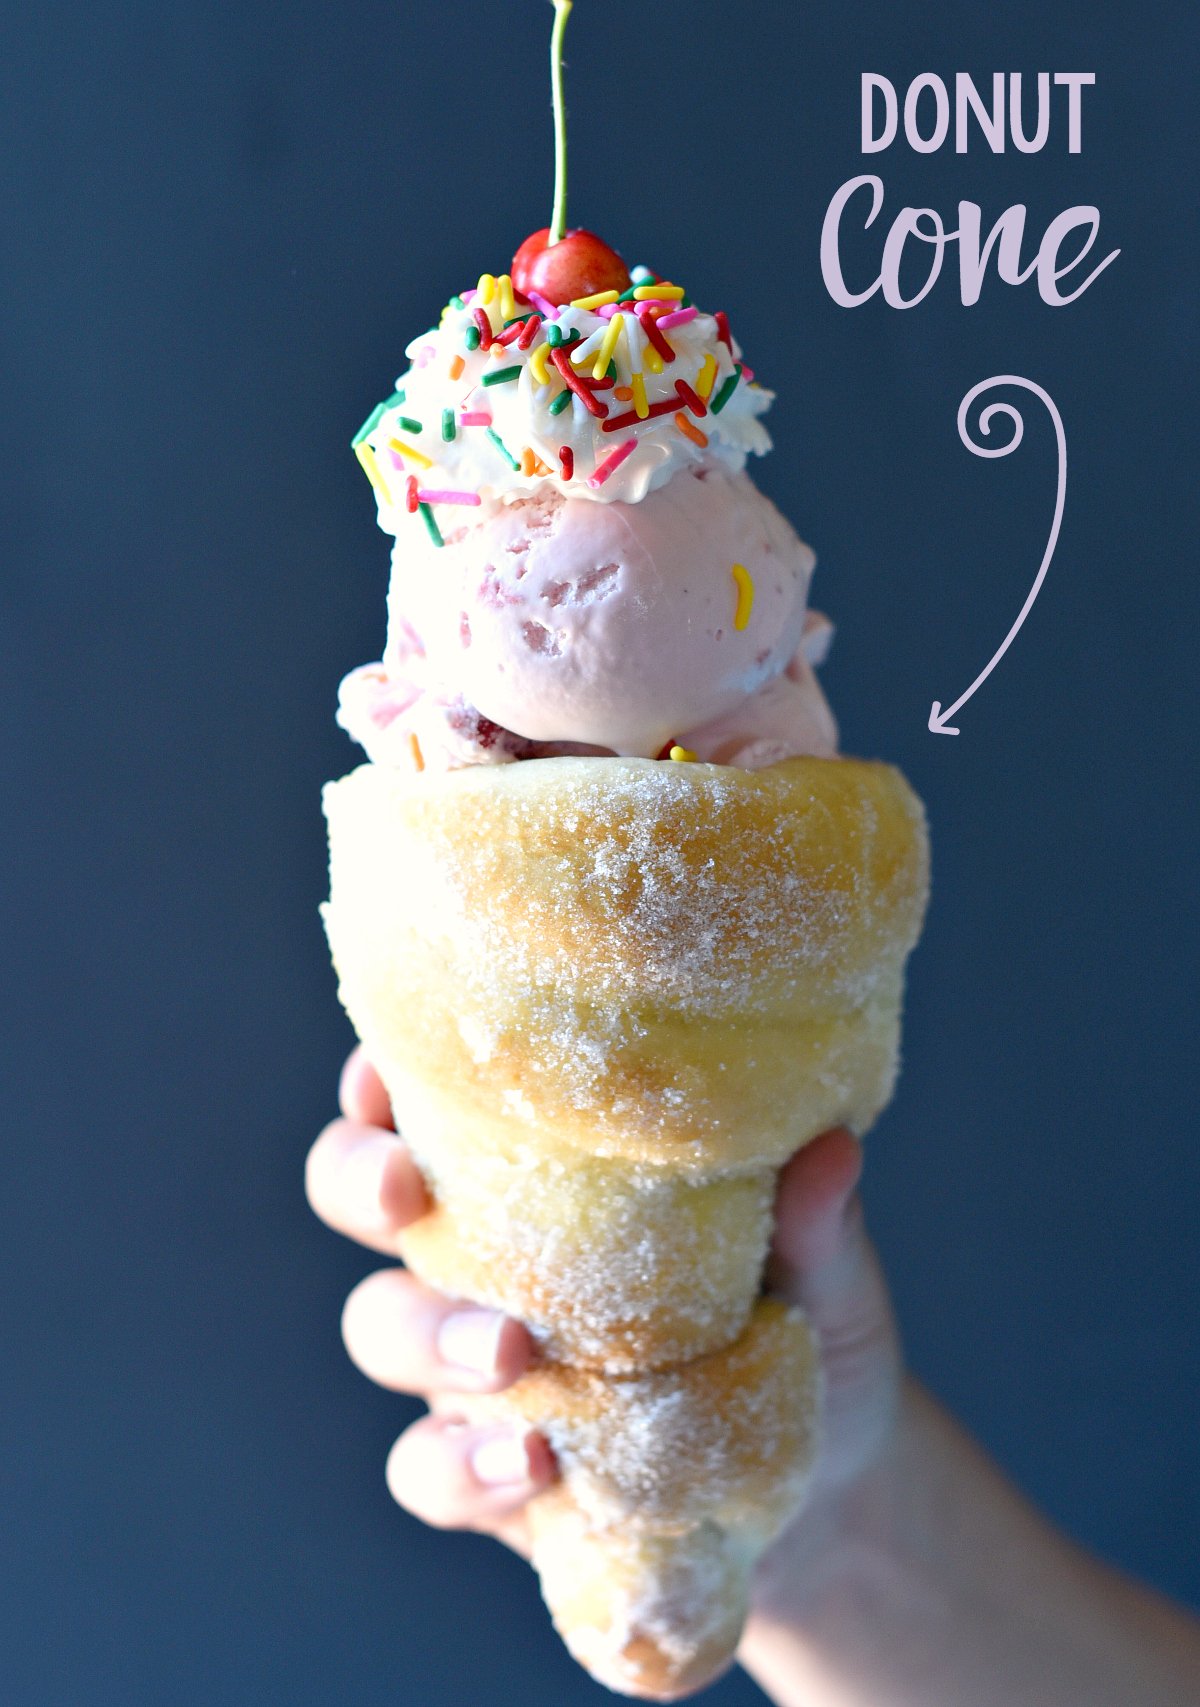 Done Cone Recipe-A fun treat to make for summer. Eat ice cream (or pie filling) right out of a Rhodes dough cone sprinkled in sugar.